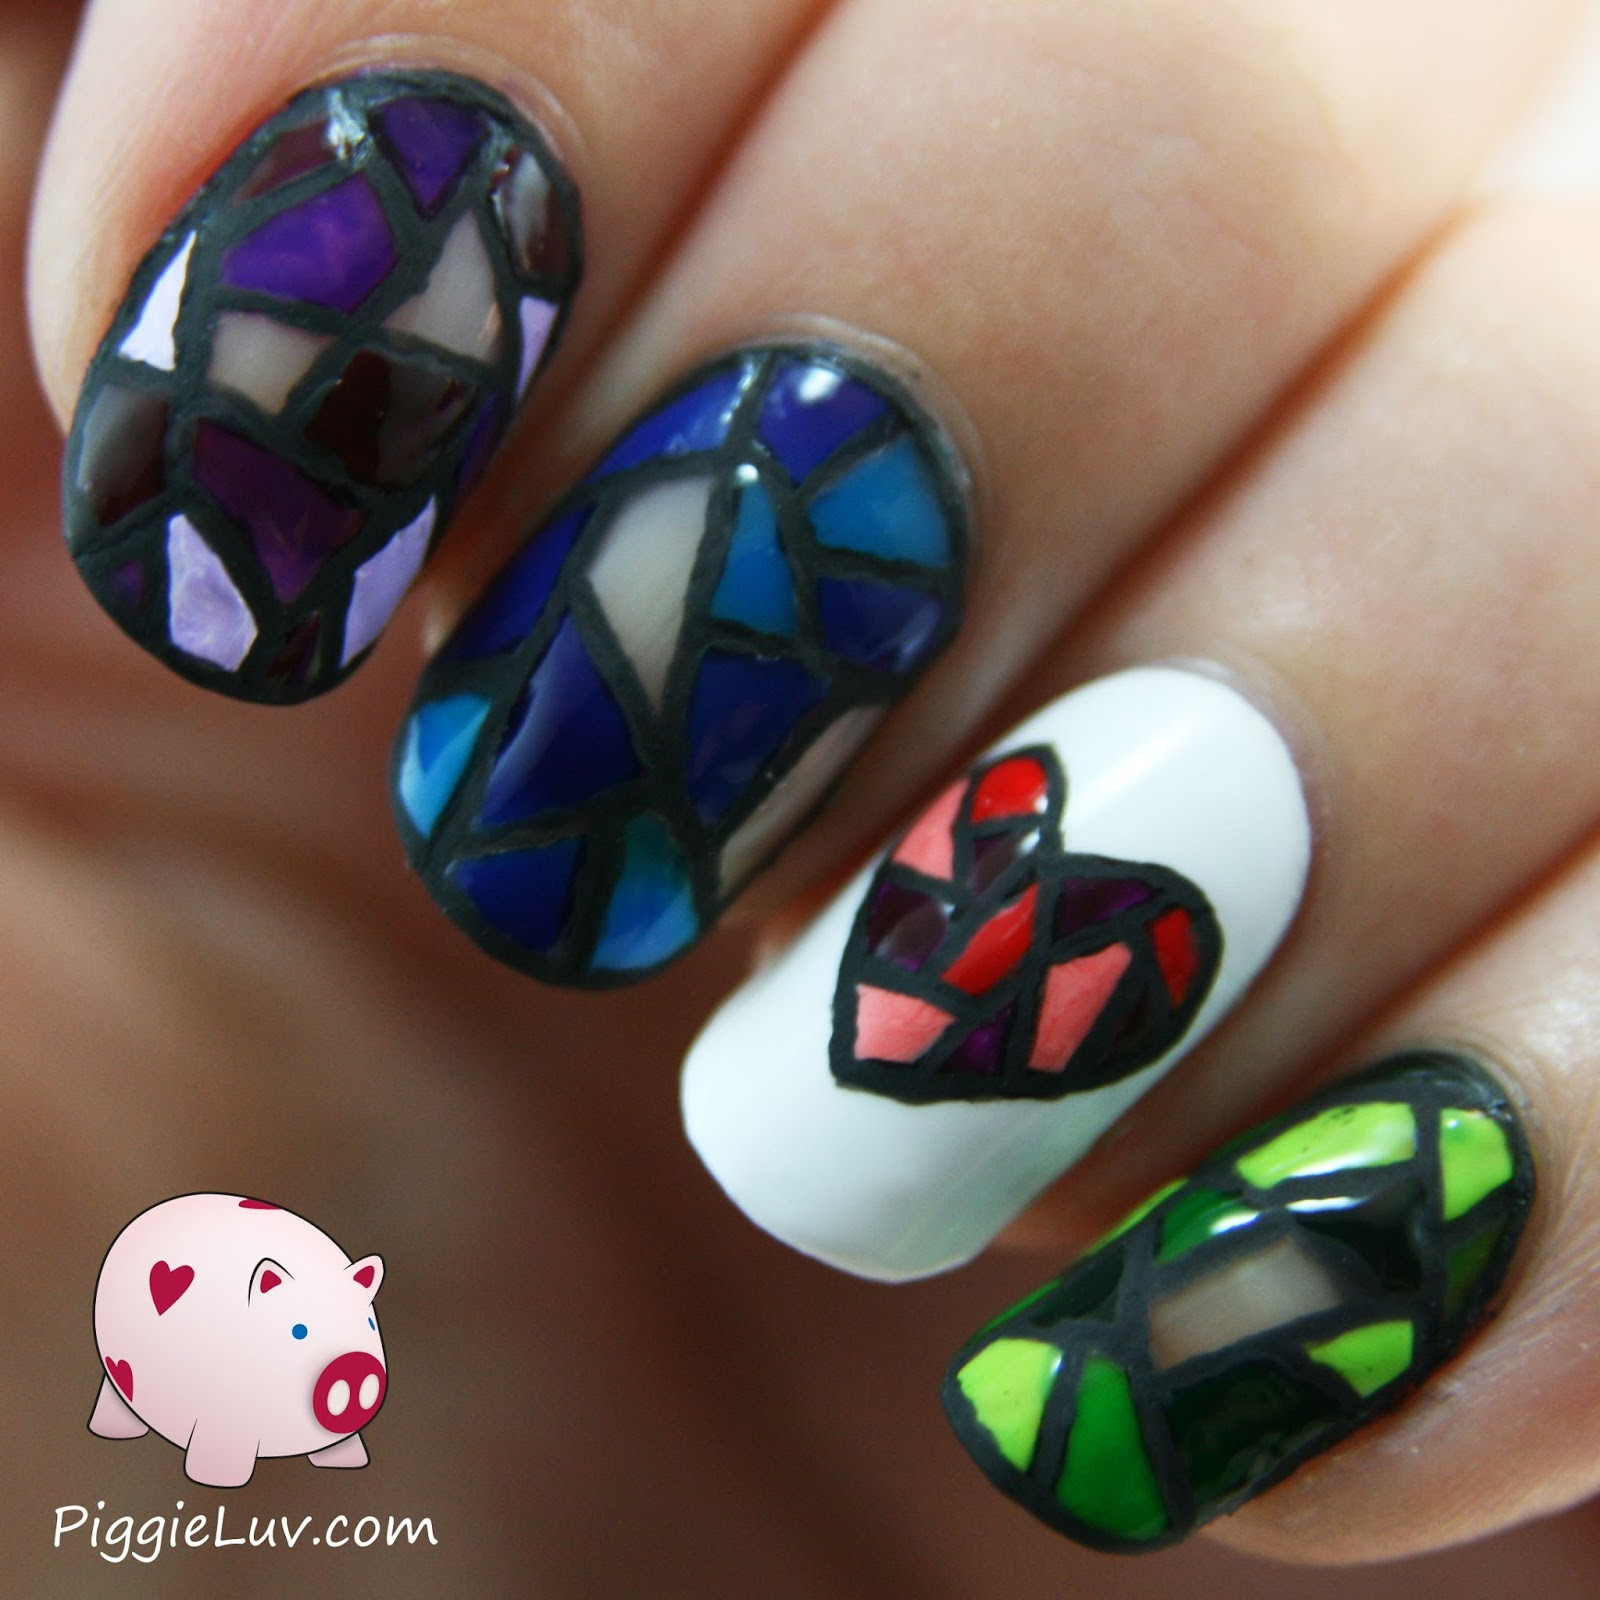 Glass Nail Art
 PiggieLuv Stained glass twin nails